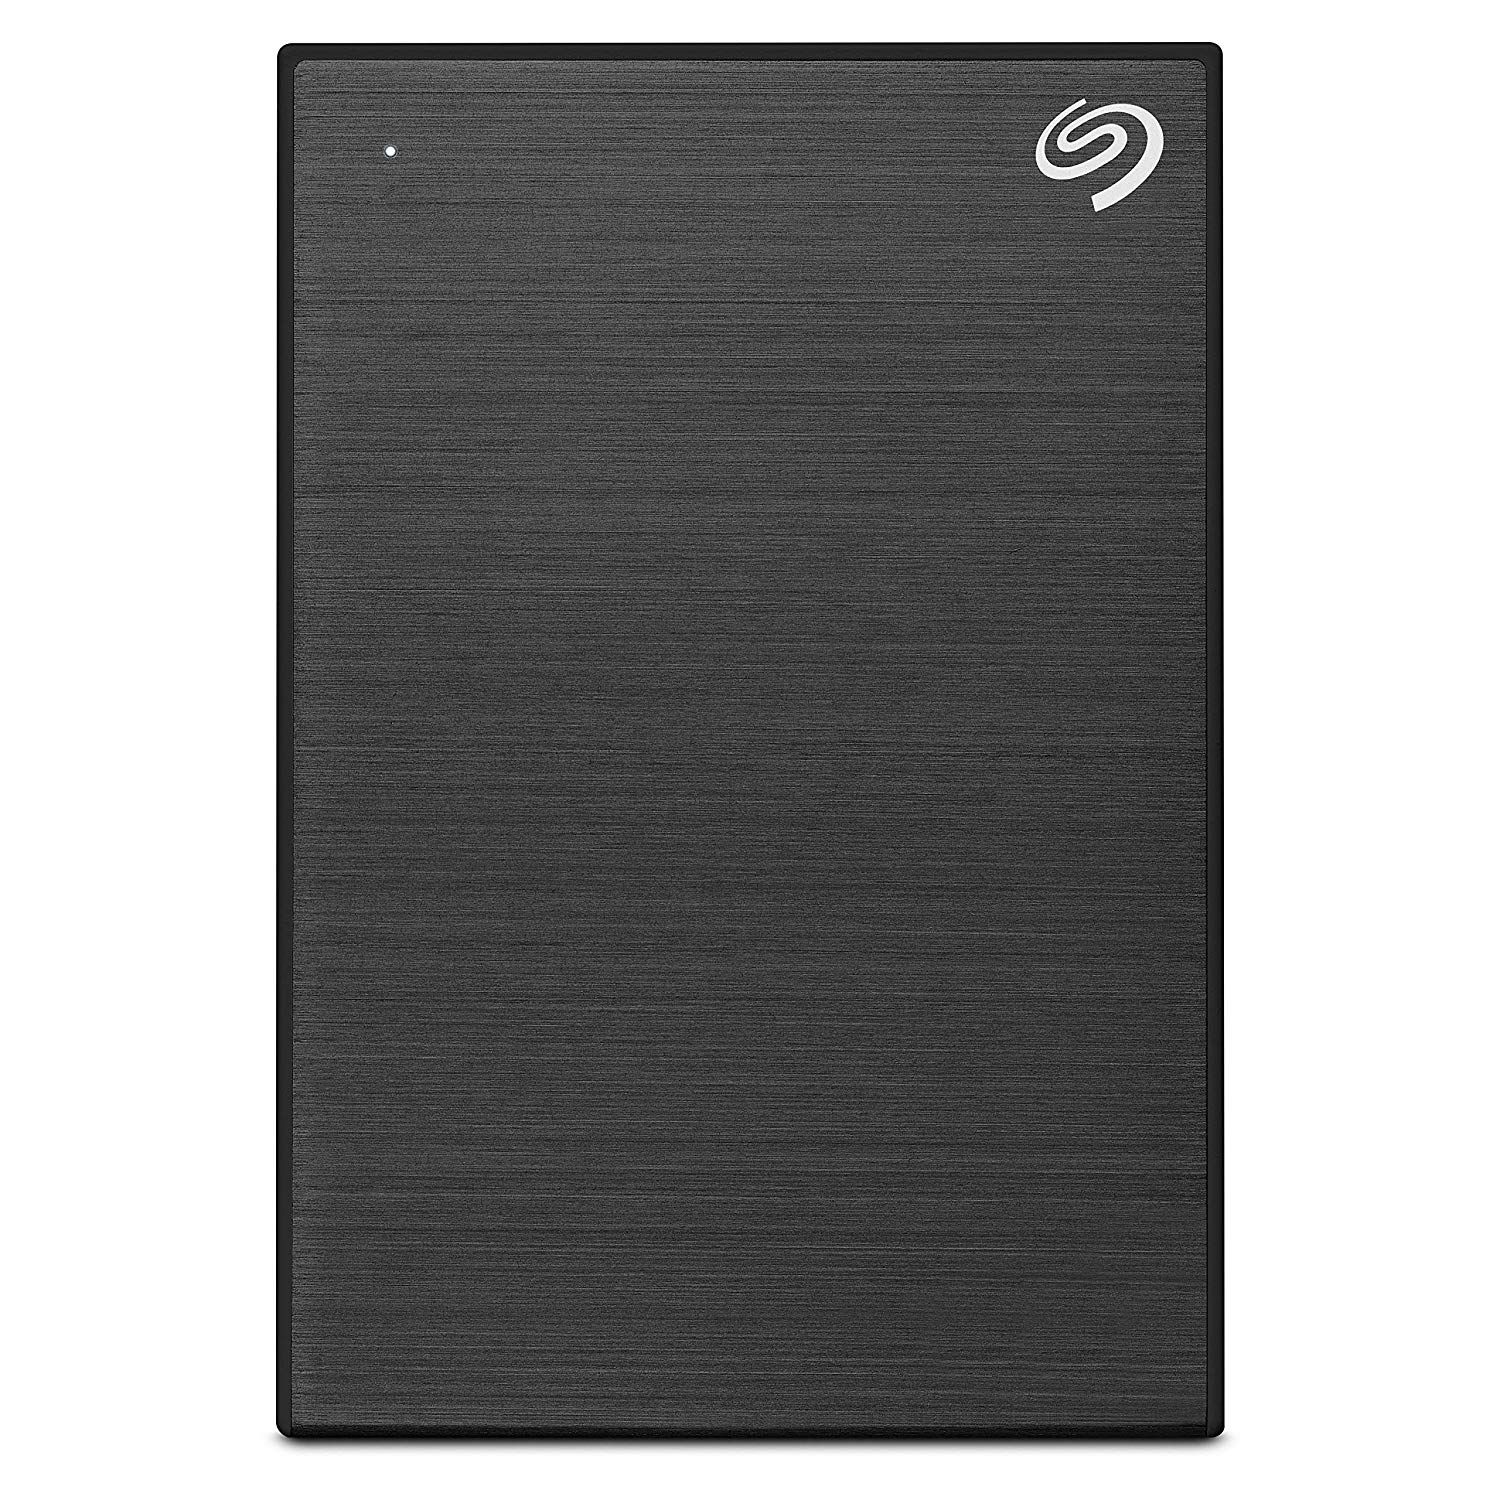     			Seagate Backup Plus Slim 4TB External Hard Drive Portable HDD-Black USB 3.0 for PC Laptop and Mac, 1 year Mylio Create, 4 Months Adobe CC Photography, and 3-year Rescue Services (STHN4000400)